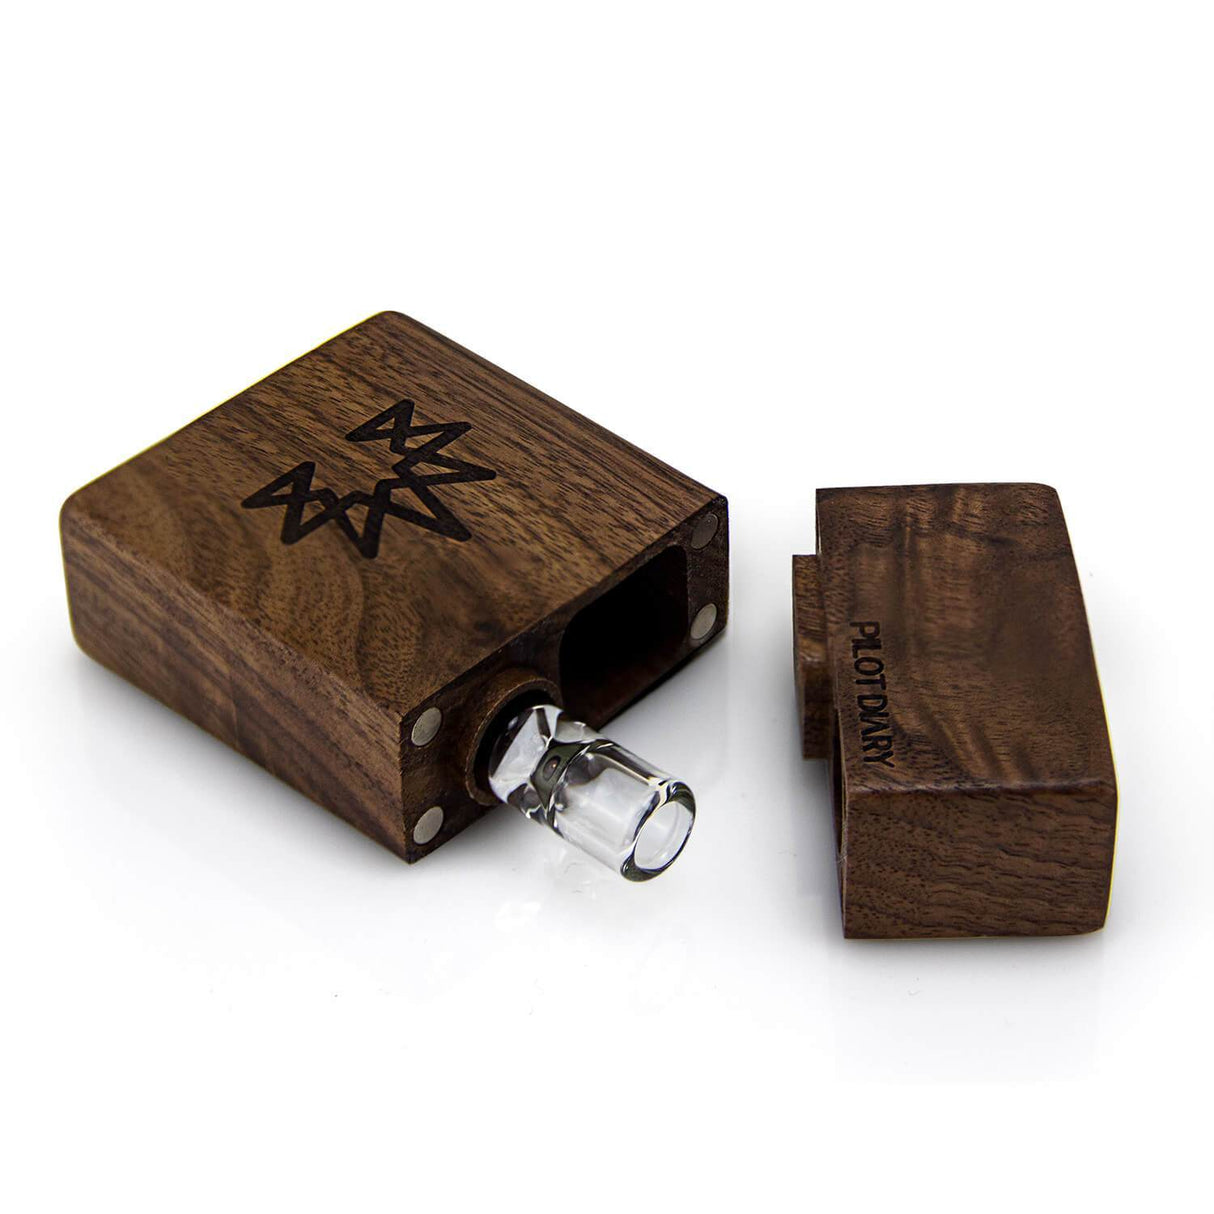 PILOT DIARY Wood Dugout with Glass One Hitter Pipe, Compact and Portable